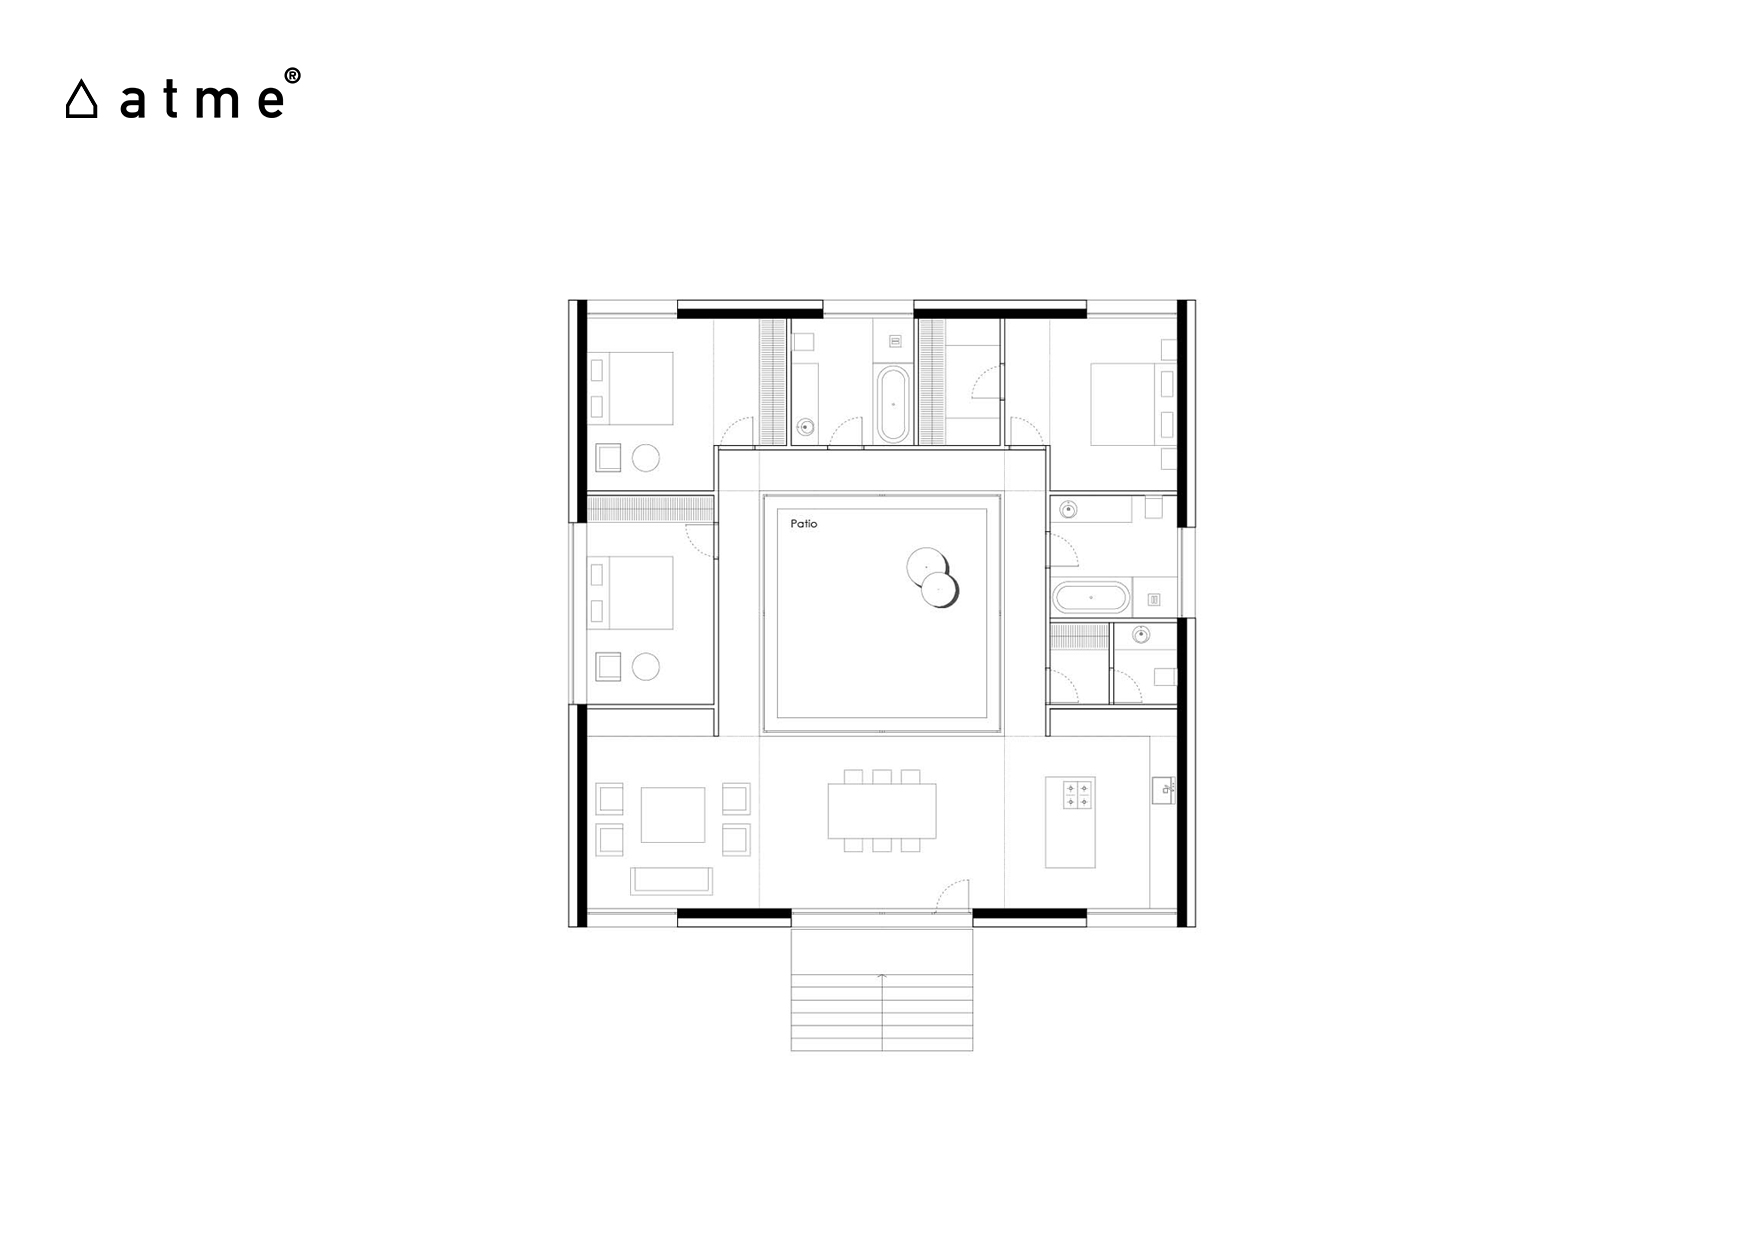 atme-grundriss-RESPONSIVE-HOUSE-bungalow-lichthof